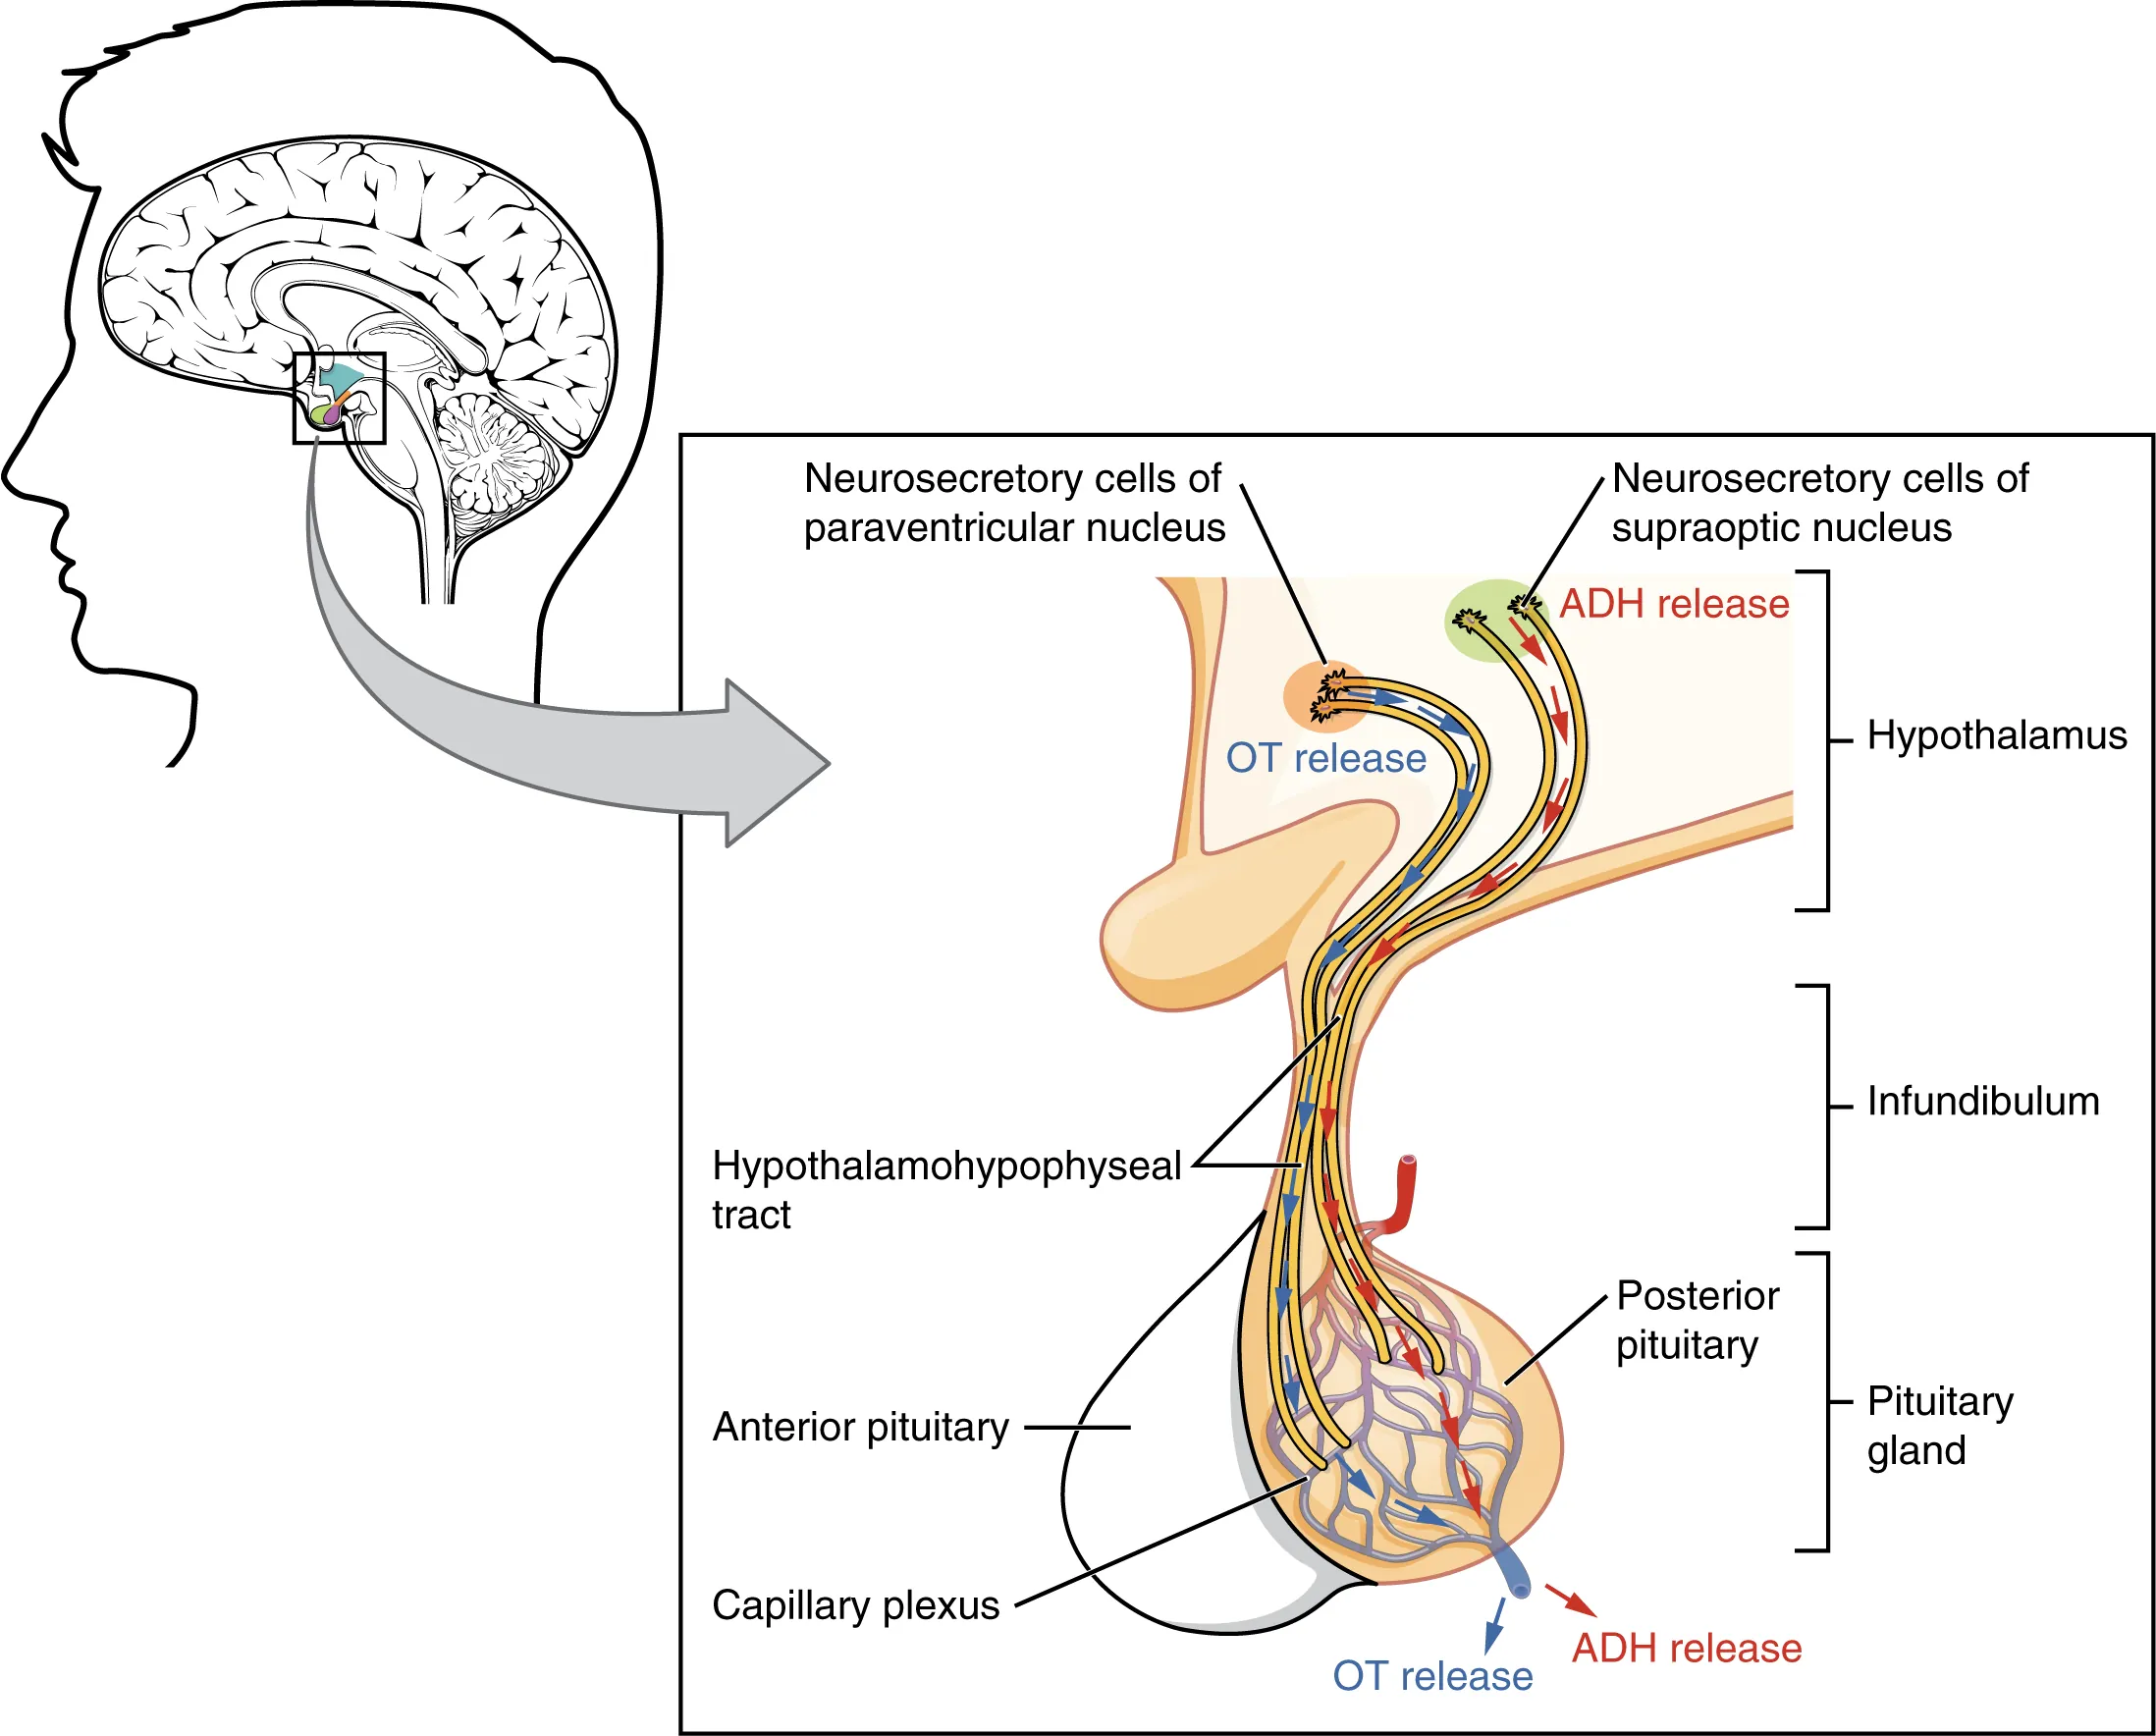 This illustration zooms in on the hypothalamus and the attached pituitary gland. The posterior pituitary is highlighted. Two nuclei in the hypothalamus contain neurosecretory cells that release different hormones. The neurosecretory cells of the paraventricular nucleus release oxytocin (OT) while the neurosecretory cells of the supraoptic nucleus release anti-diuretic hormone (ADH). The neurosecretory cells stretch down the infundibulum into the posterior pituitary. The tube-like extensions of the neurosecretory cells within the infundibulum are labeled the hypothalamophypophyseal tracts. These tracts connect with a web-like network of blood vessels in the posterior pituitary called the capillary plexus. From the capillary plexus, the posterior pituitary secretes the OT or ADH into a single vein that exits the pituitary.